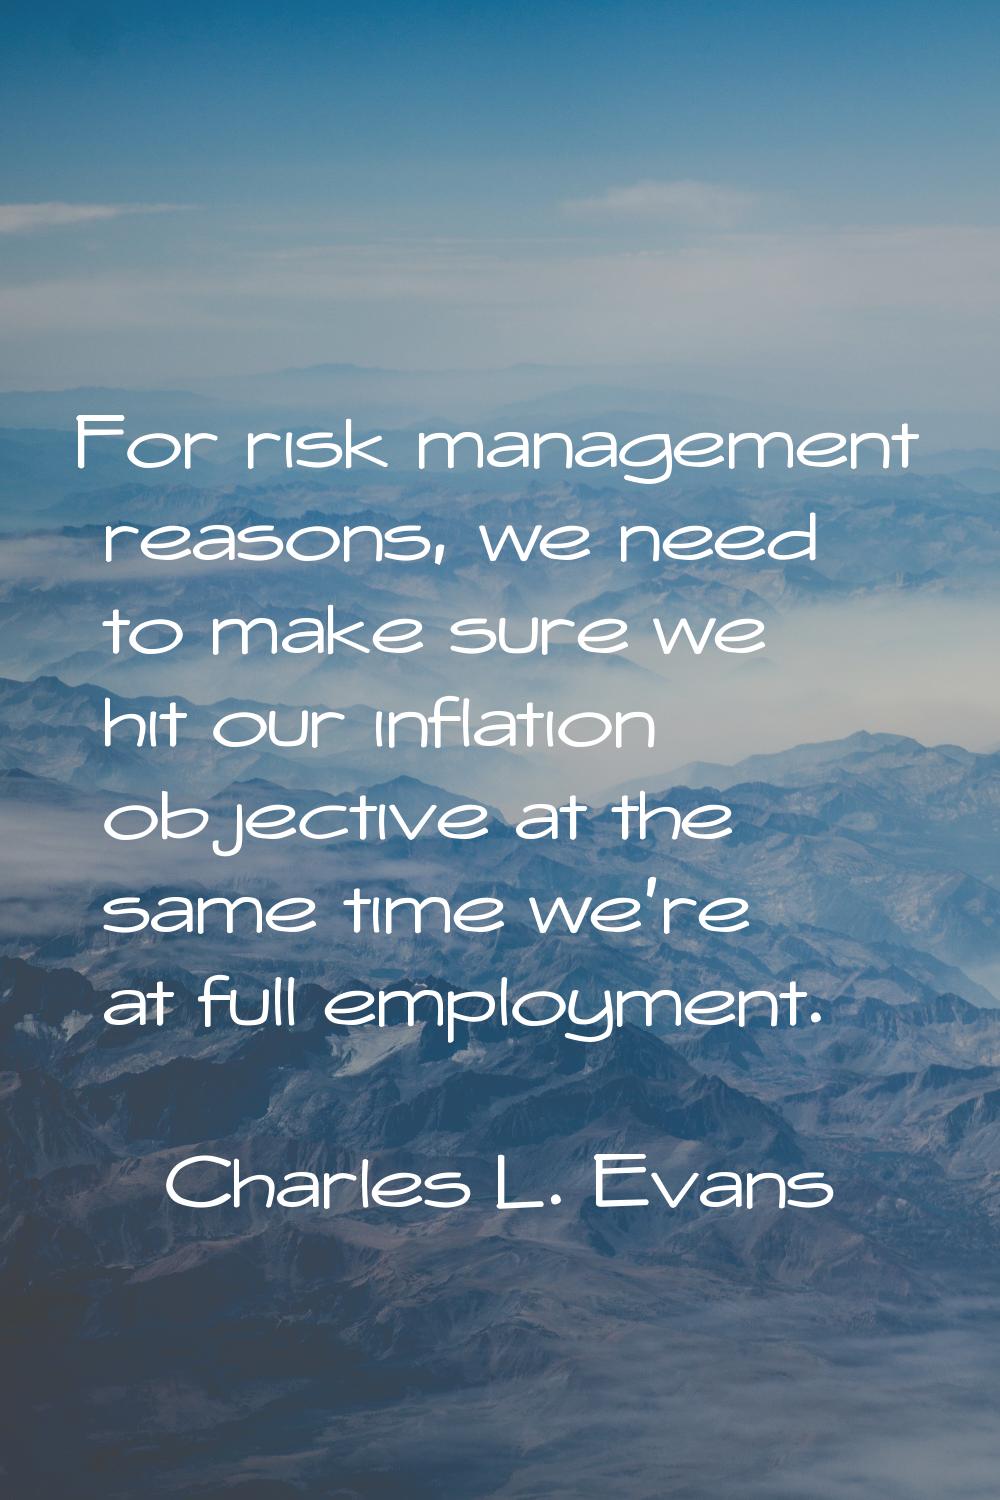 For risk management reasons, we need to make sure we hit our inflation objective at the same time w